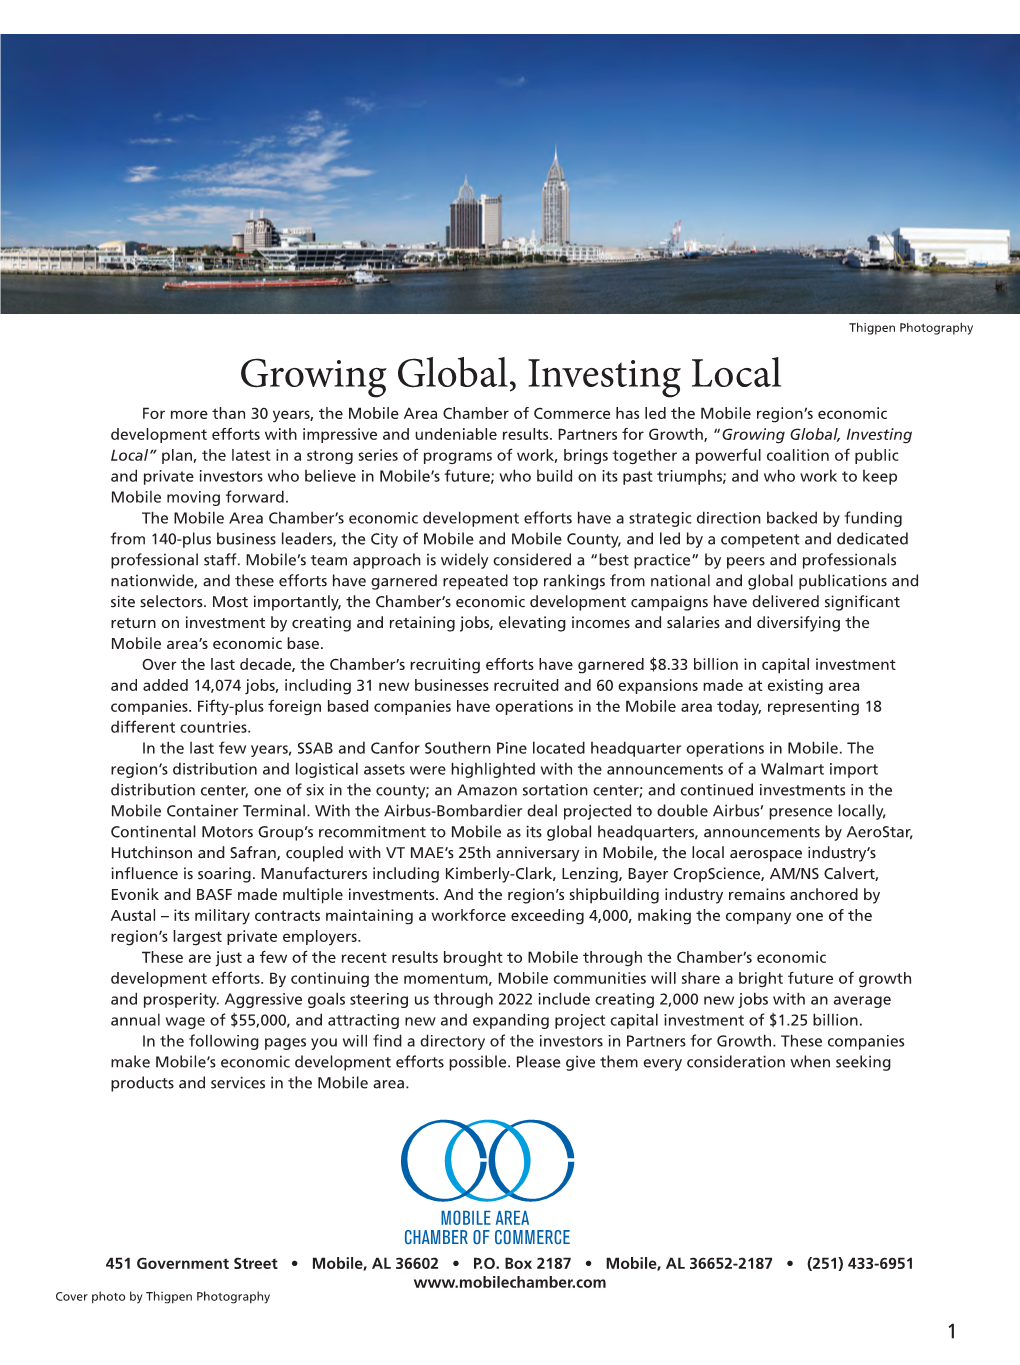 Growing Global, Investing Local